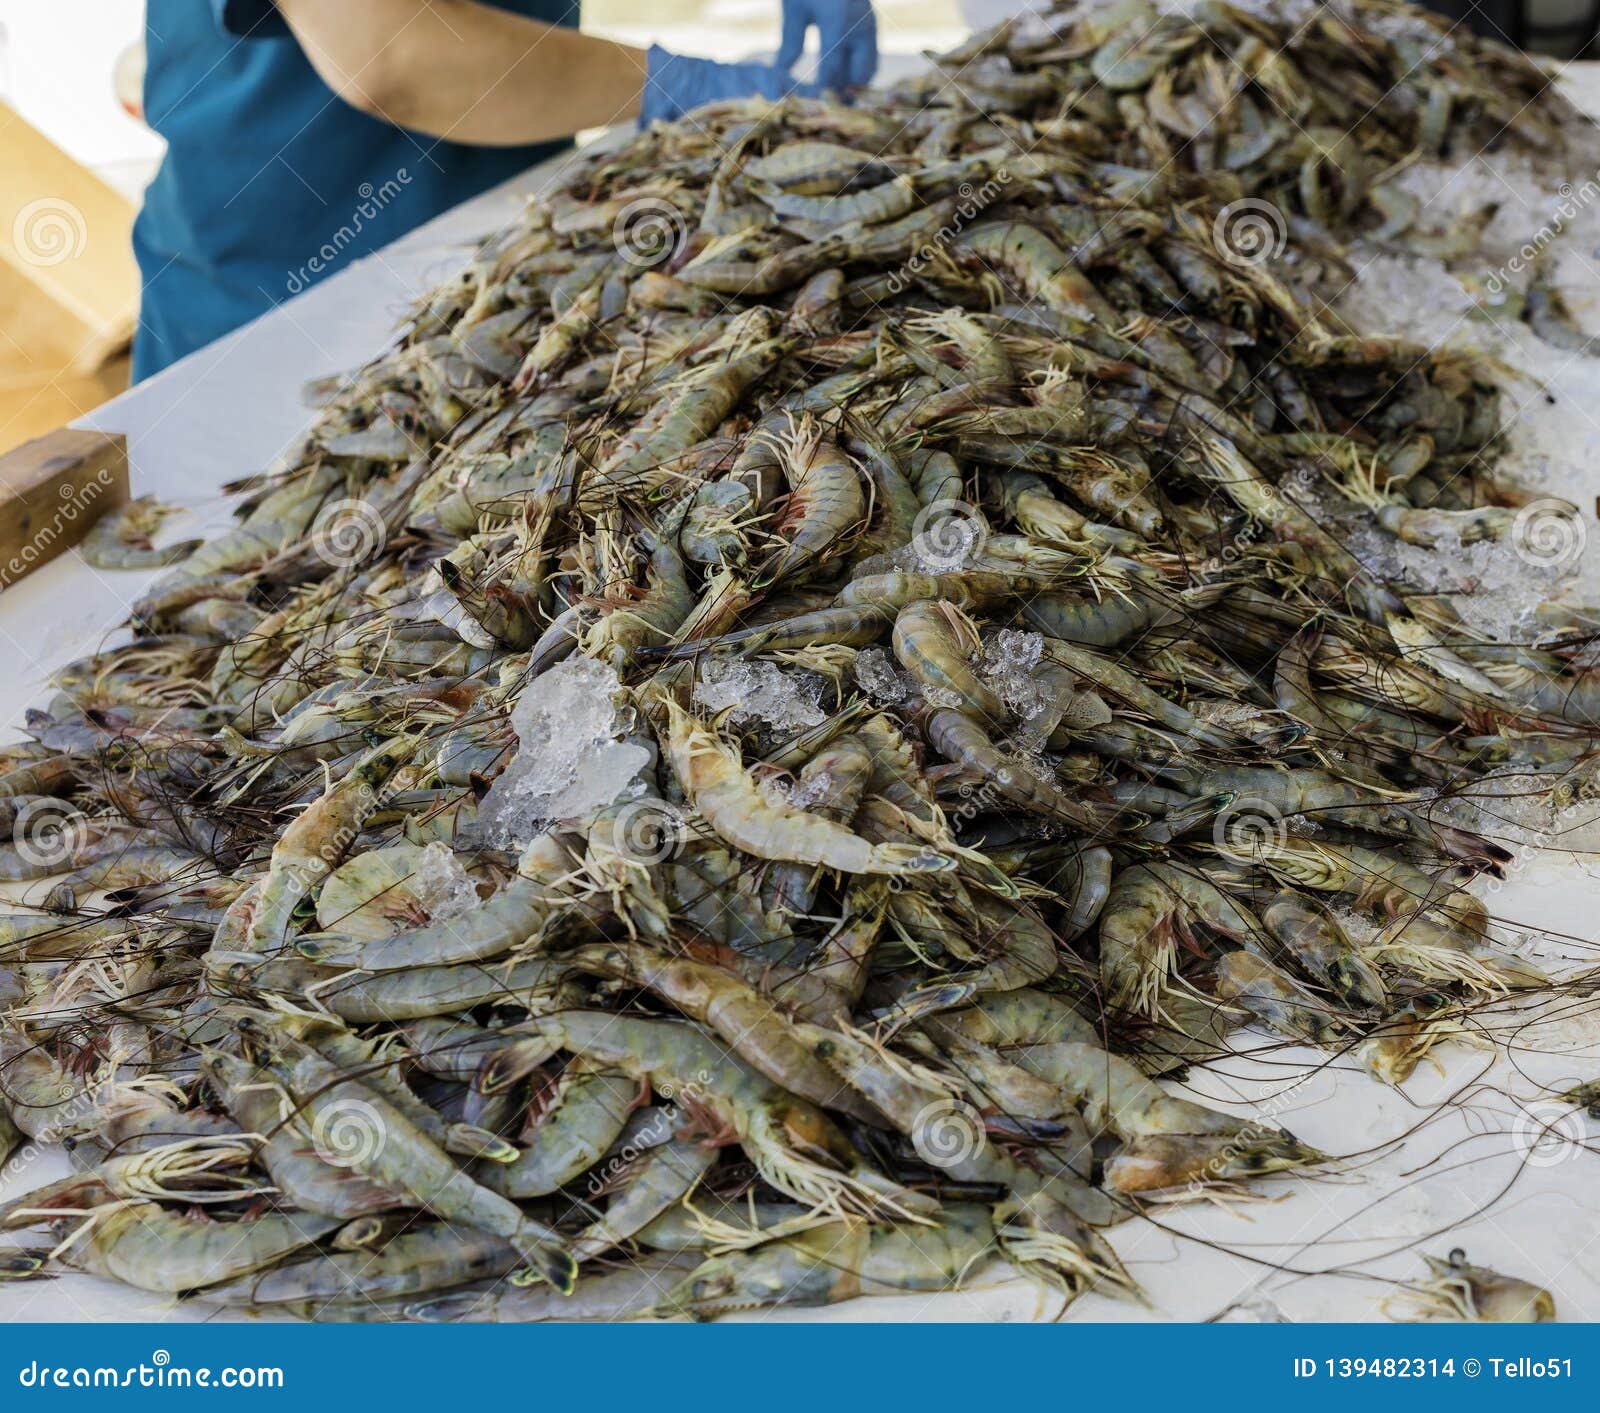 Shrimp catch stock photo. Image of offloaded, food, pile - 139482314